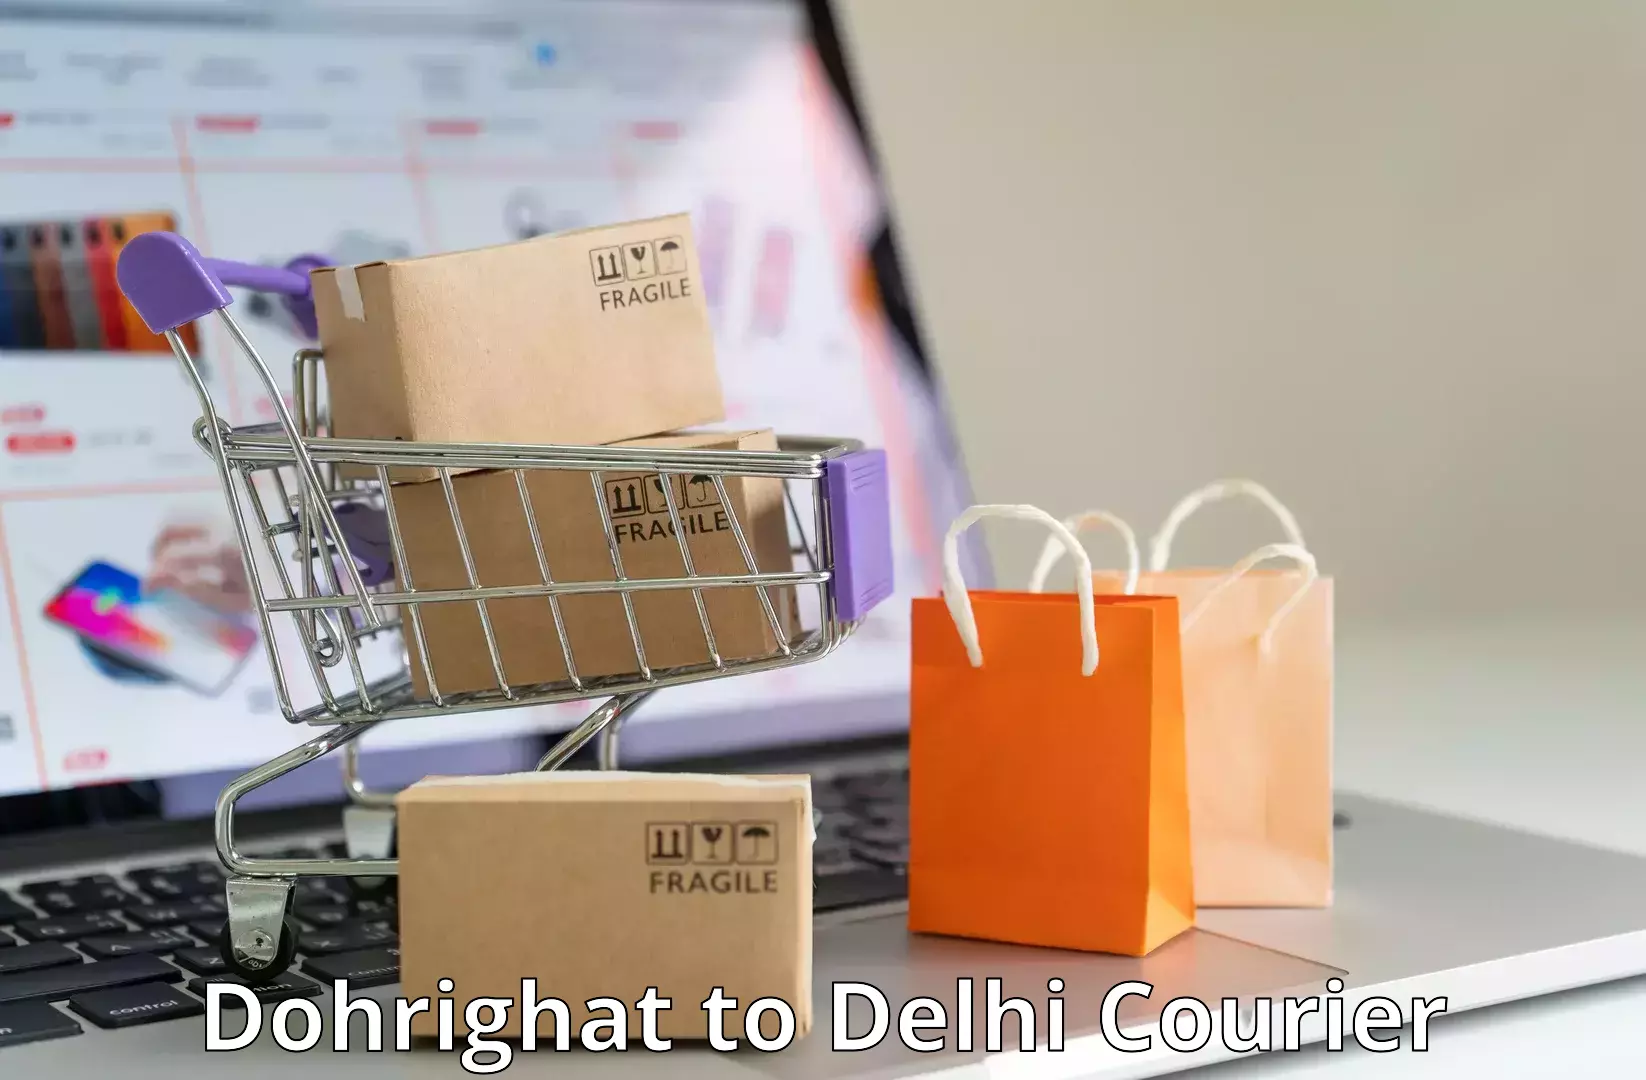 Package tracking Dohrighat to University of Delhi